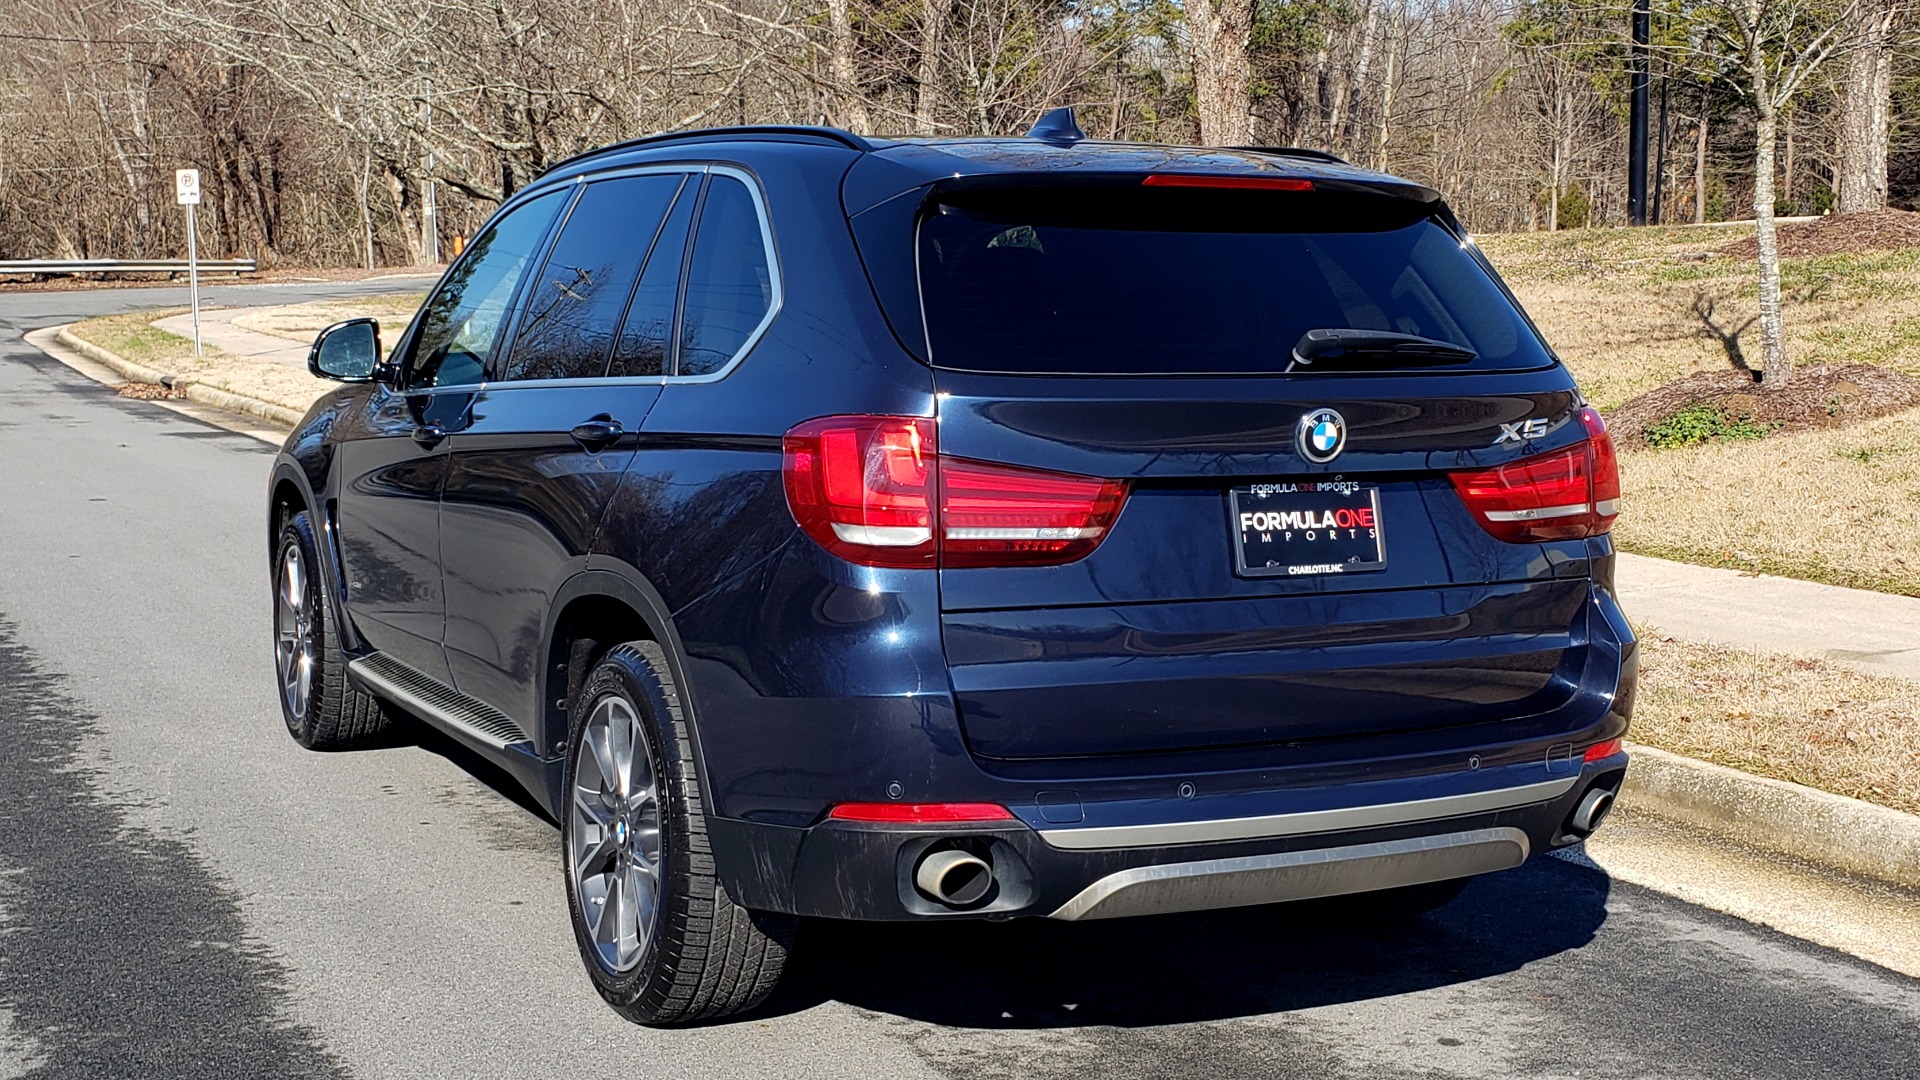 Used 2015 BMW X5 XDRIVE35I PREMIUM / NAV / XLINE / CLD WTHR / DRVR ASST / REARVIEW for sale Sold at Formula Imports in Charlotte NC 28227 5